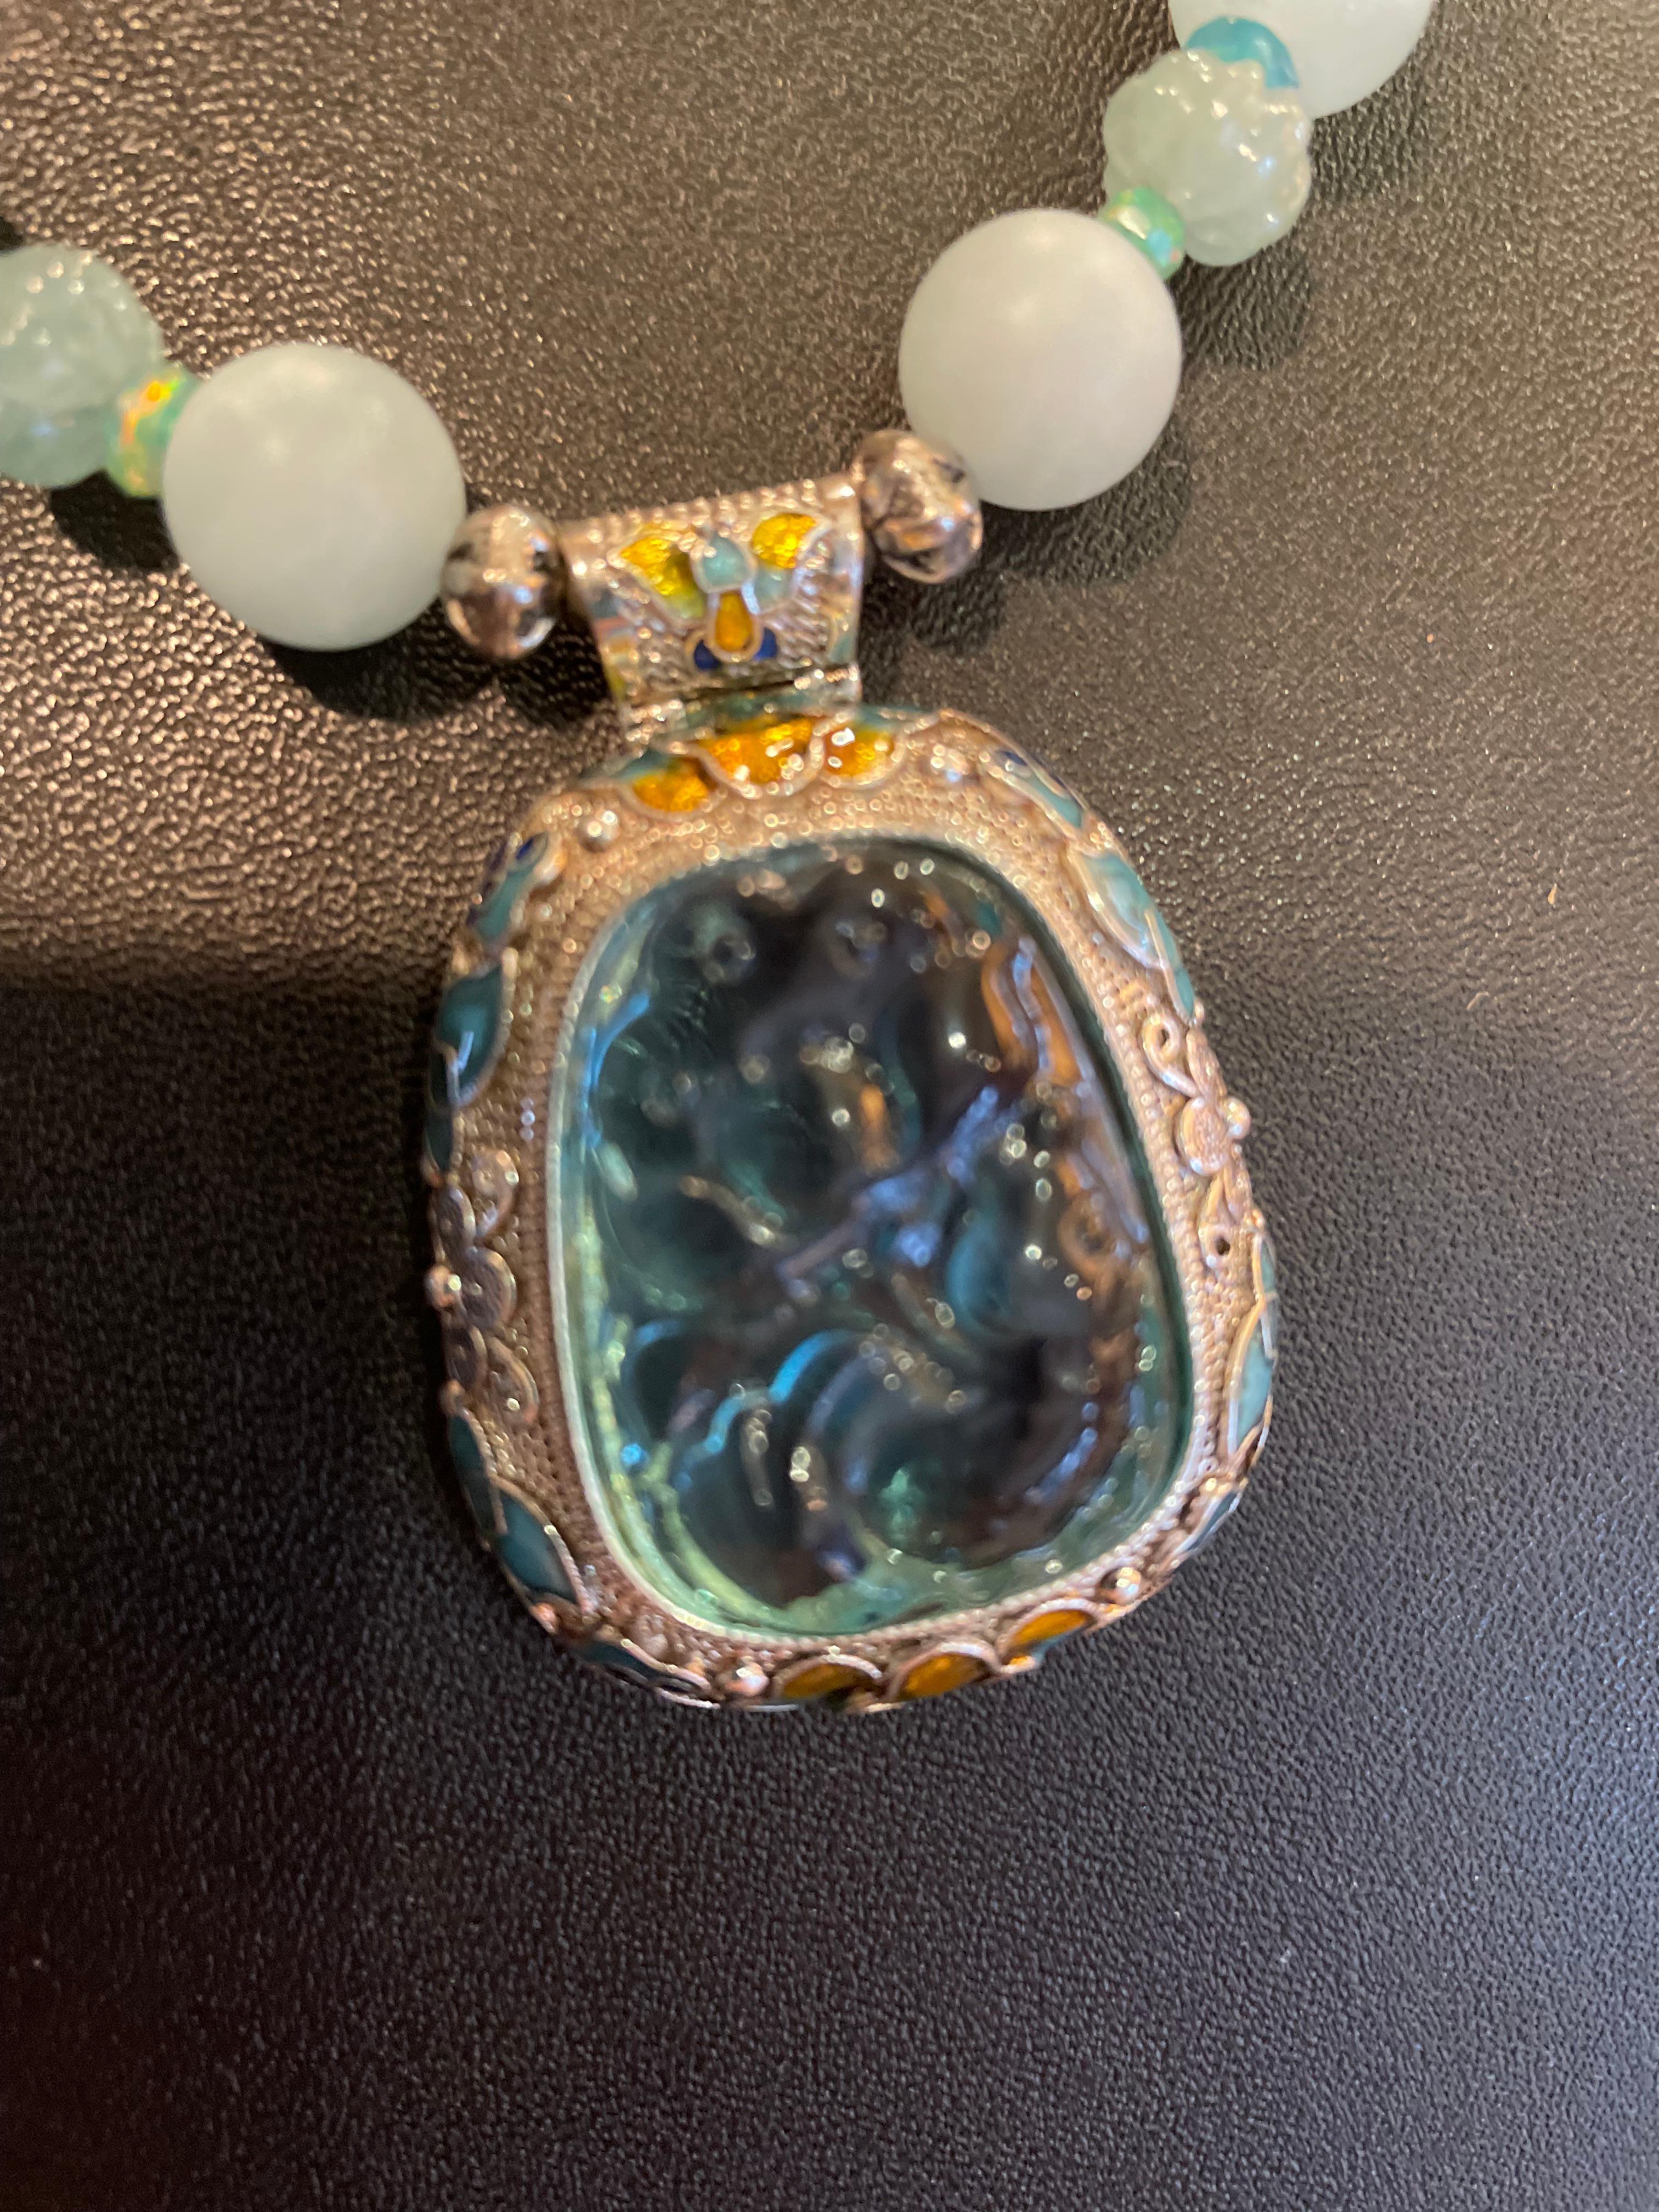 Lorraine’s Bijoux offers a new Sterling Silver ,Figural Aqua Glass and enamel lovely pendant necklace. The Aquamarine matte beads and carved Aquamarine melon shaped beads with blue opal and sterling silver spacers add richness and drama. There’s a